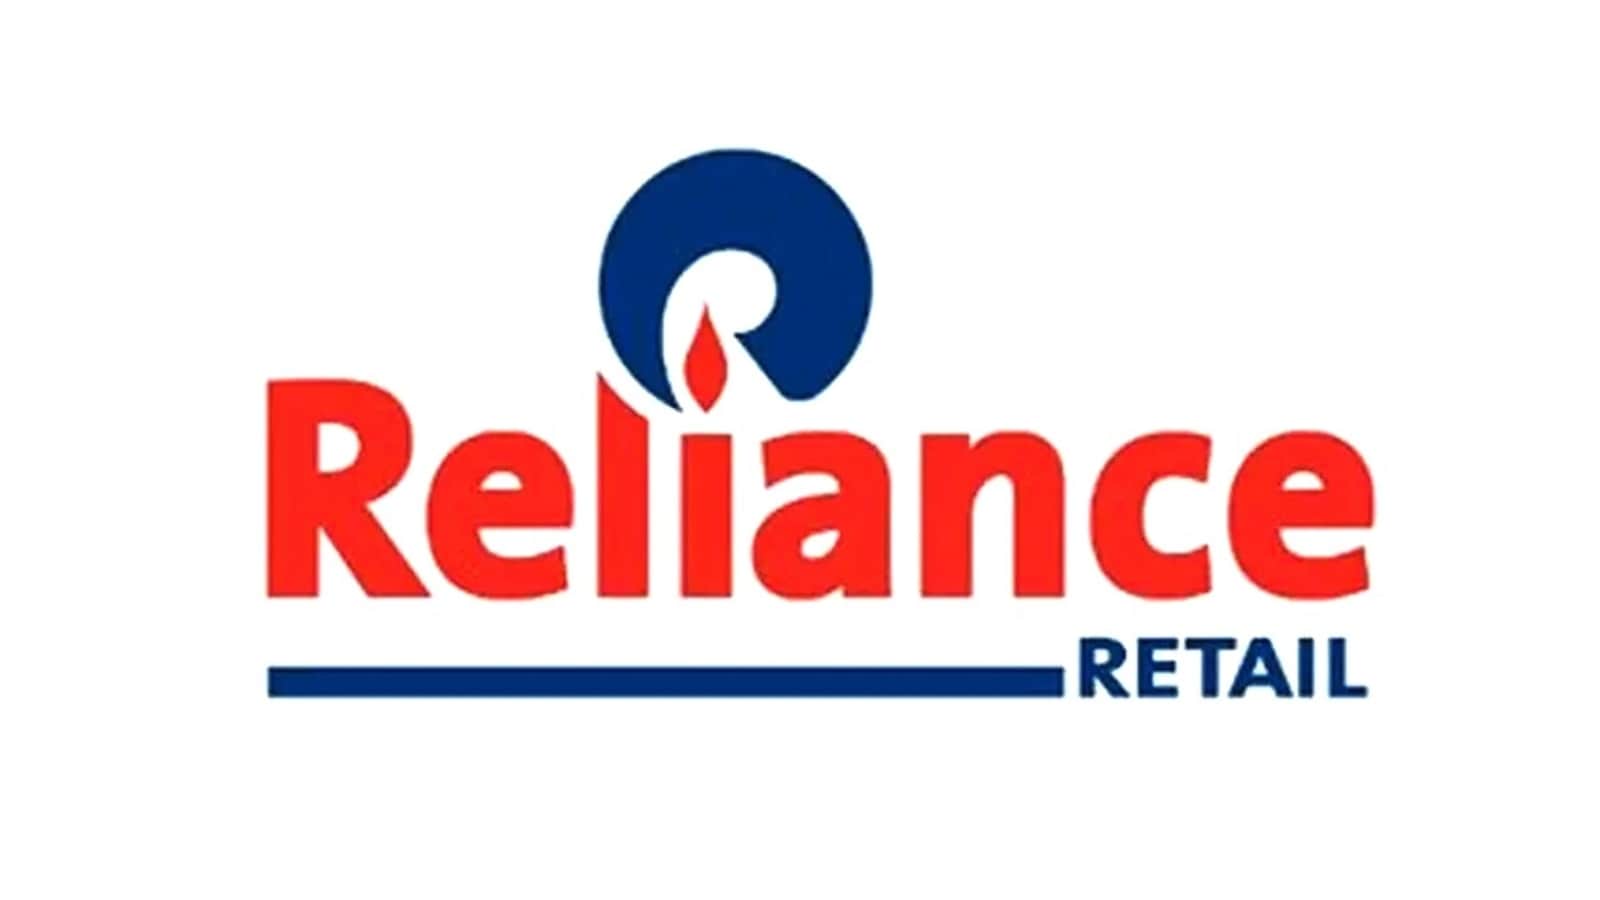 Retail India - Reliance Retail in Advanced Talks to Acquire